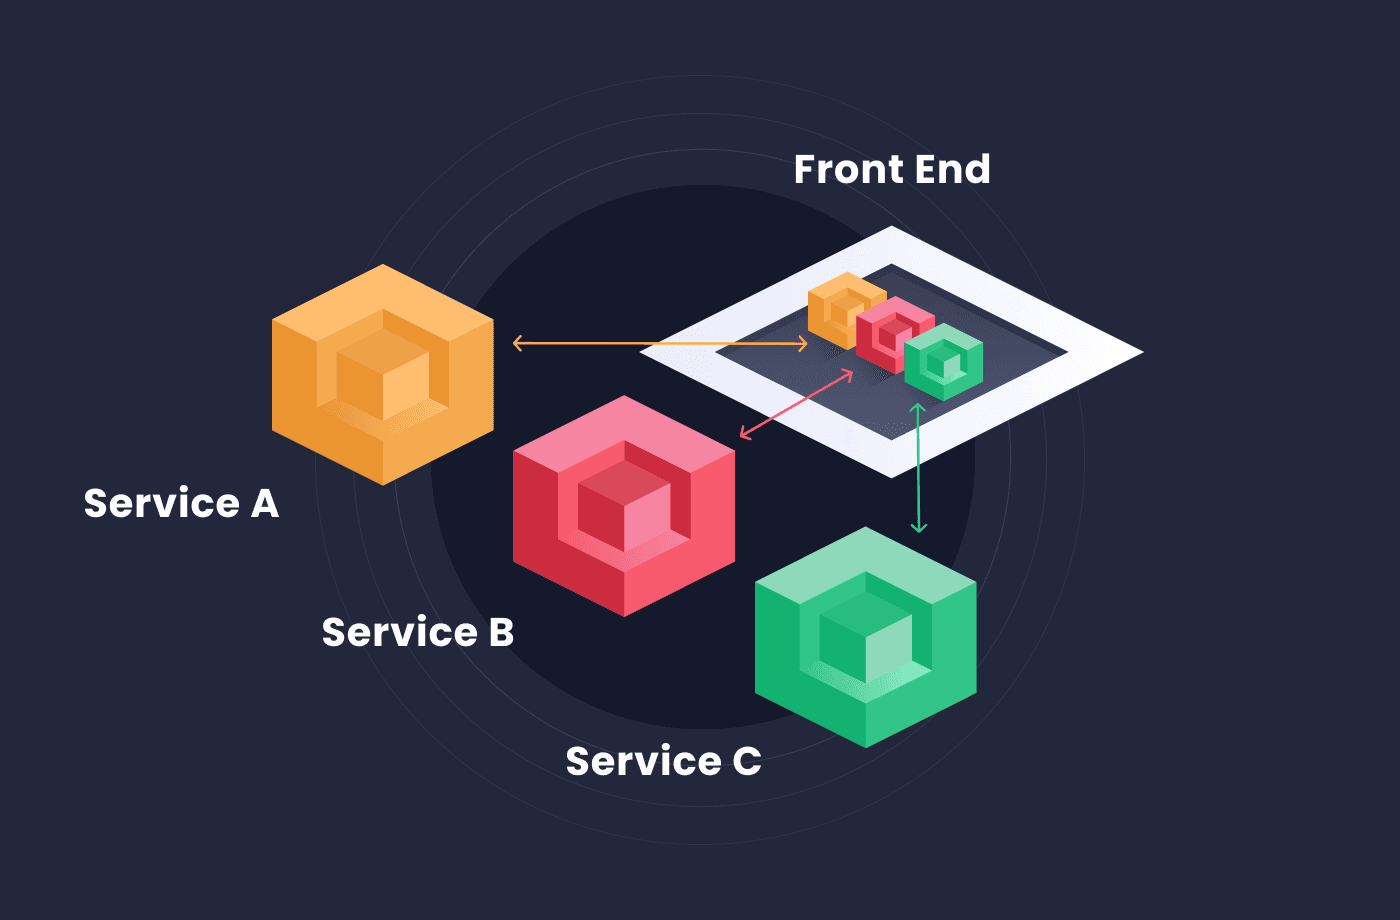 Serving Frontends in Microservices Architecture